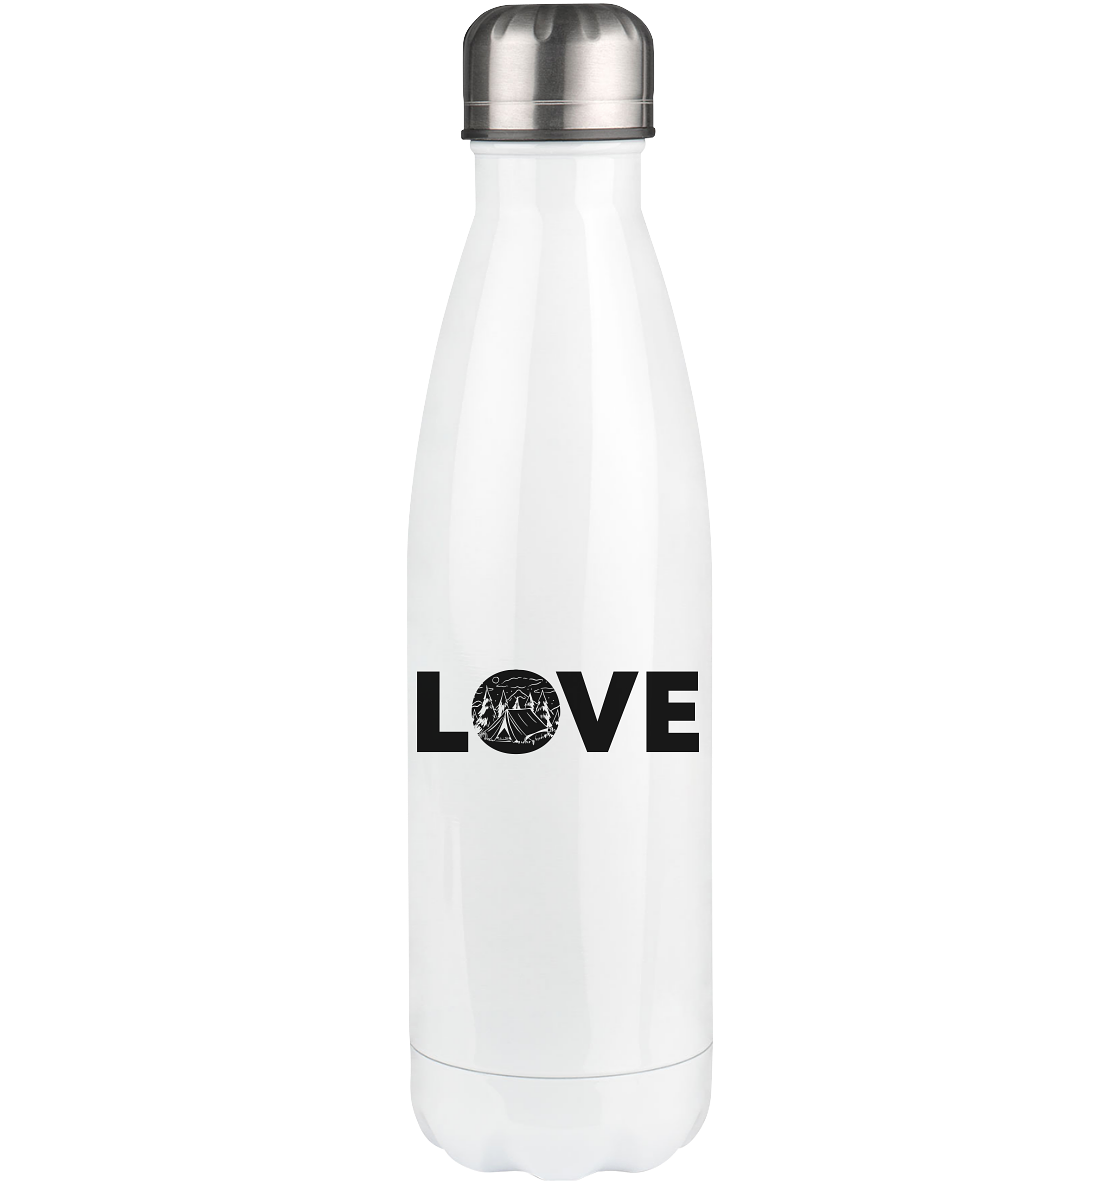 Love 1 - Edelstahl Thermosflasche camping UONP 500ml